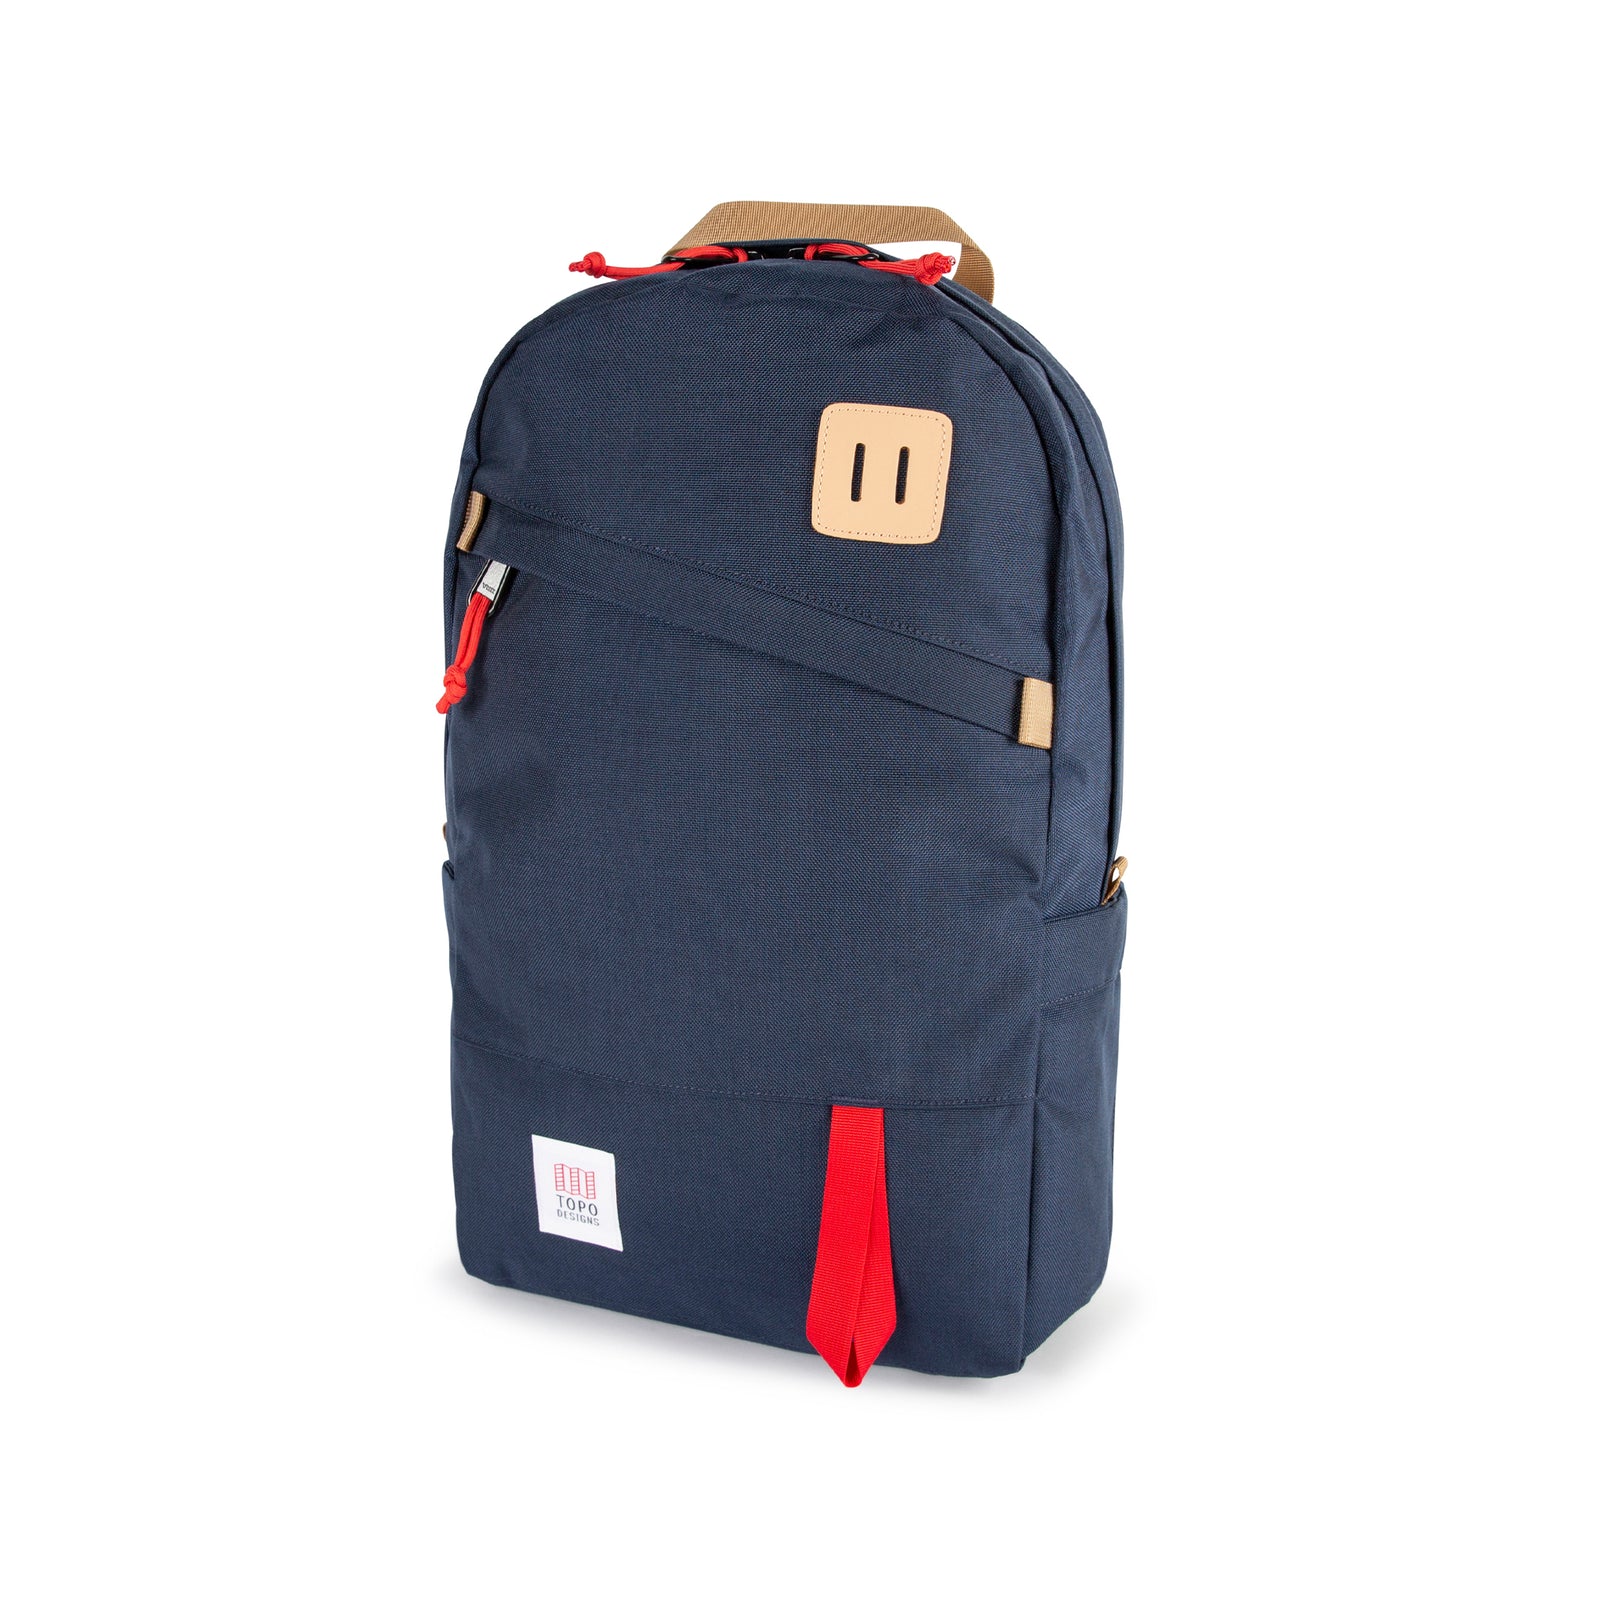 Topo Designs Daypack Classic 100% recycled nylon laptop backpack for work or school in "Navy / Red" blue.